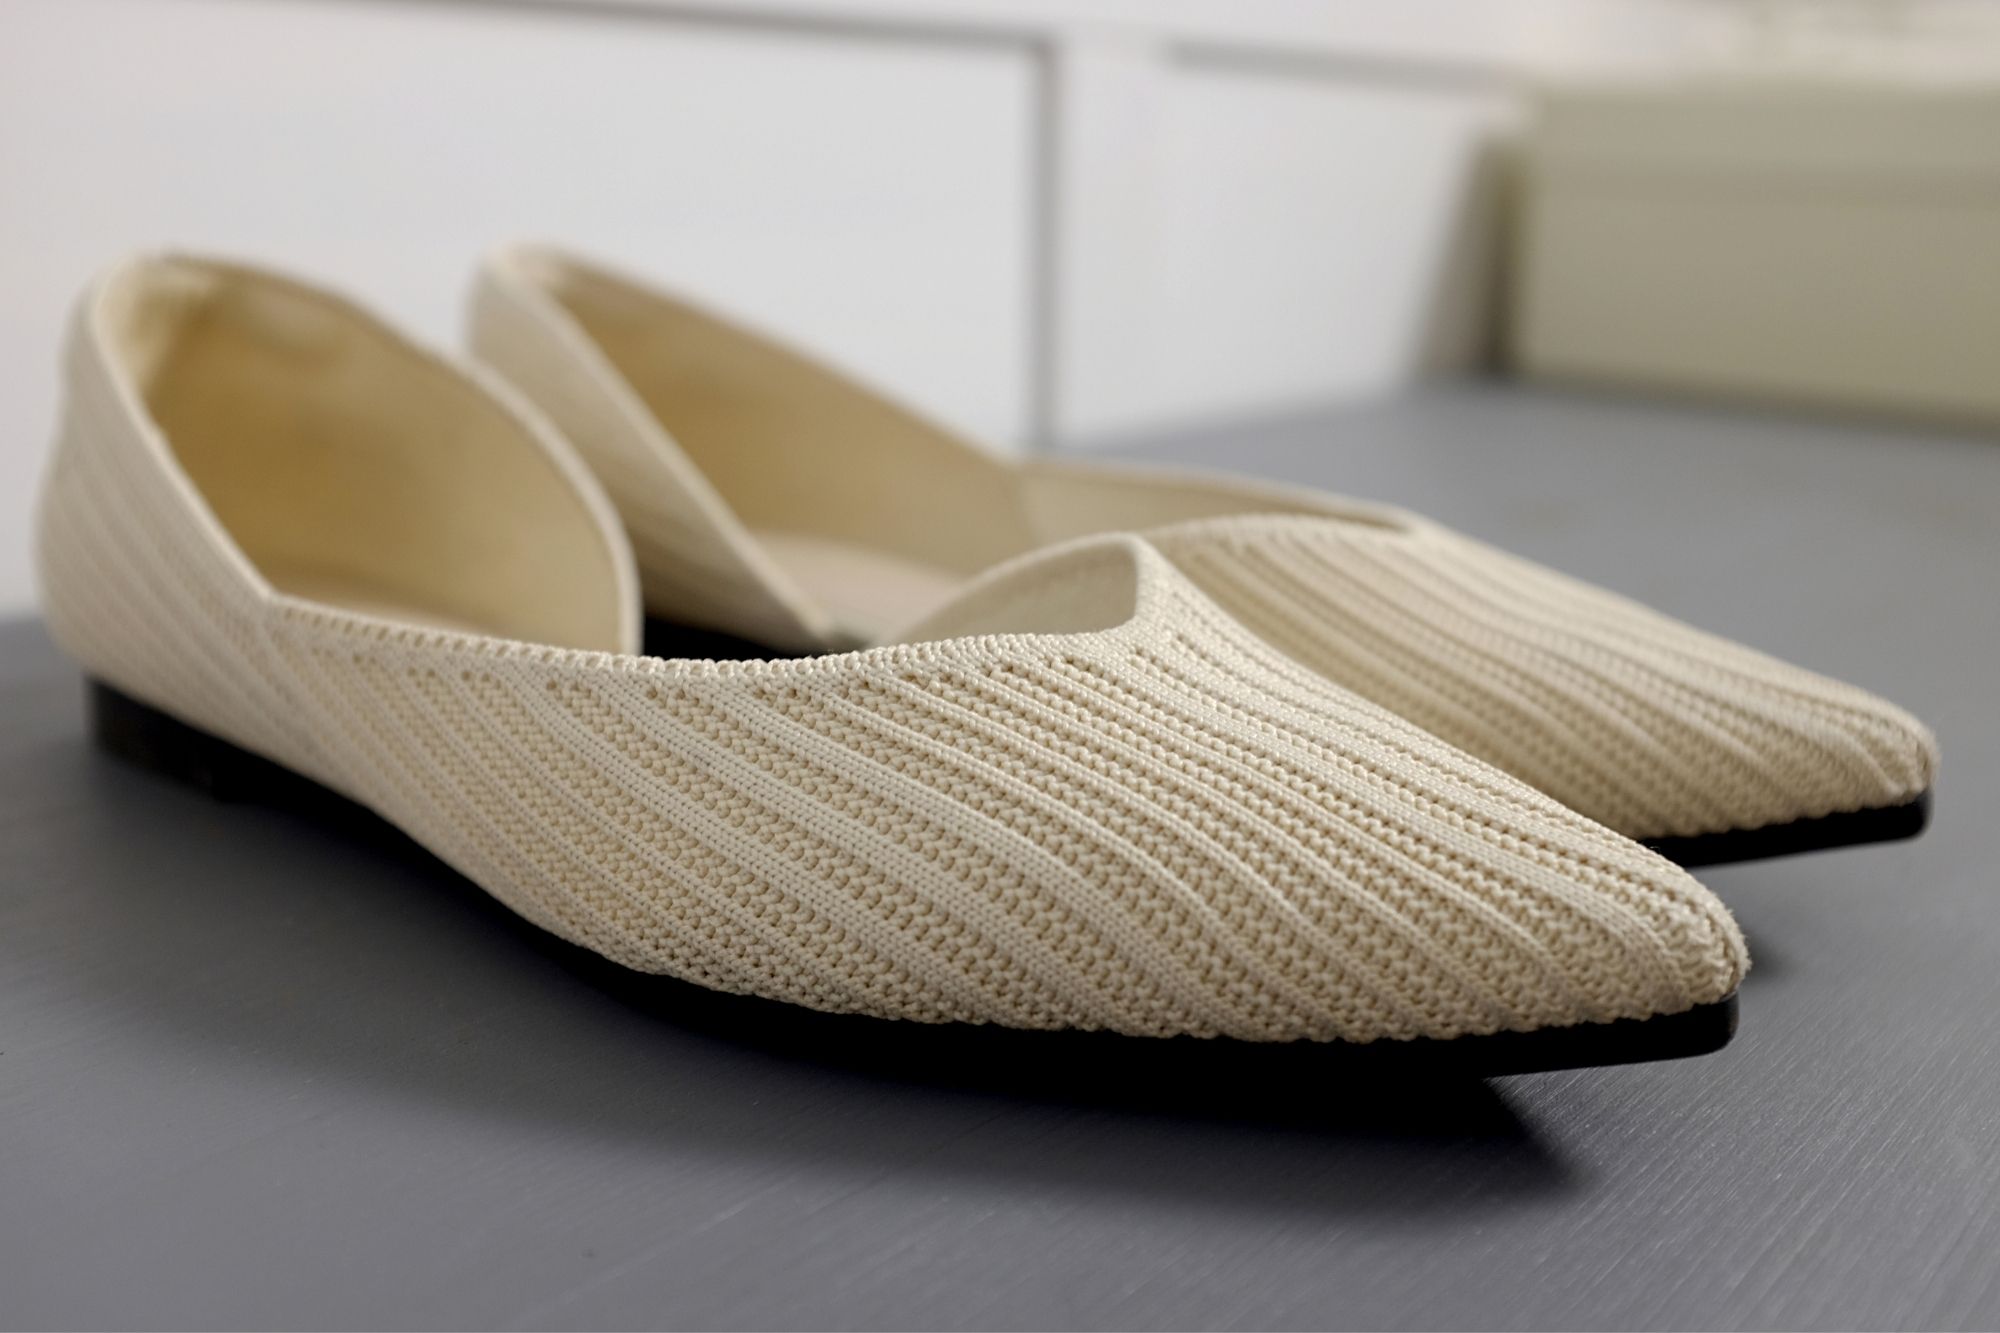 Remarkable Sustainable Fashion: Honest Review of Vivaia Shoes